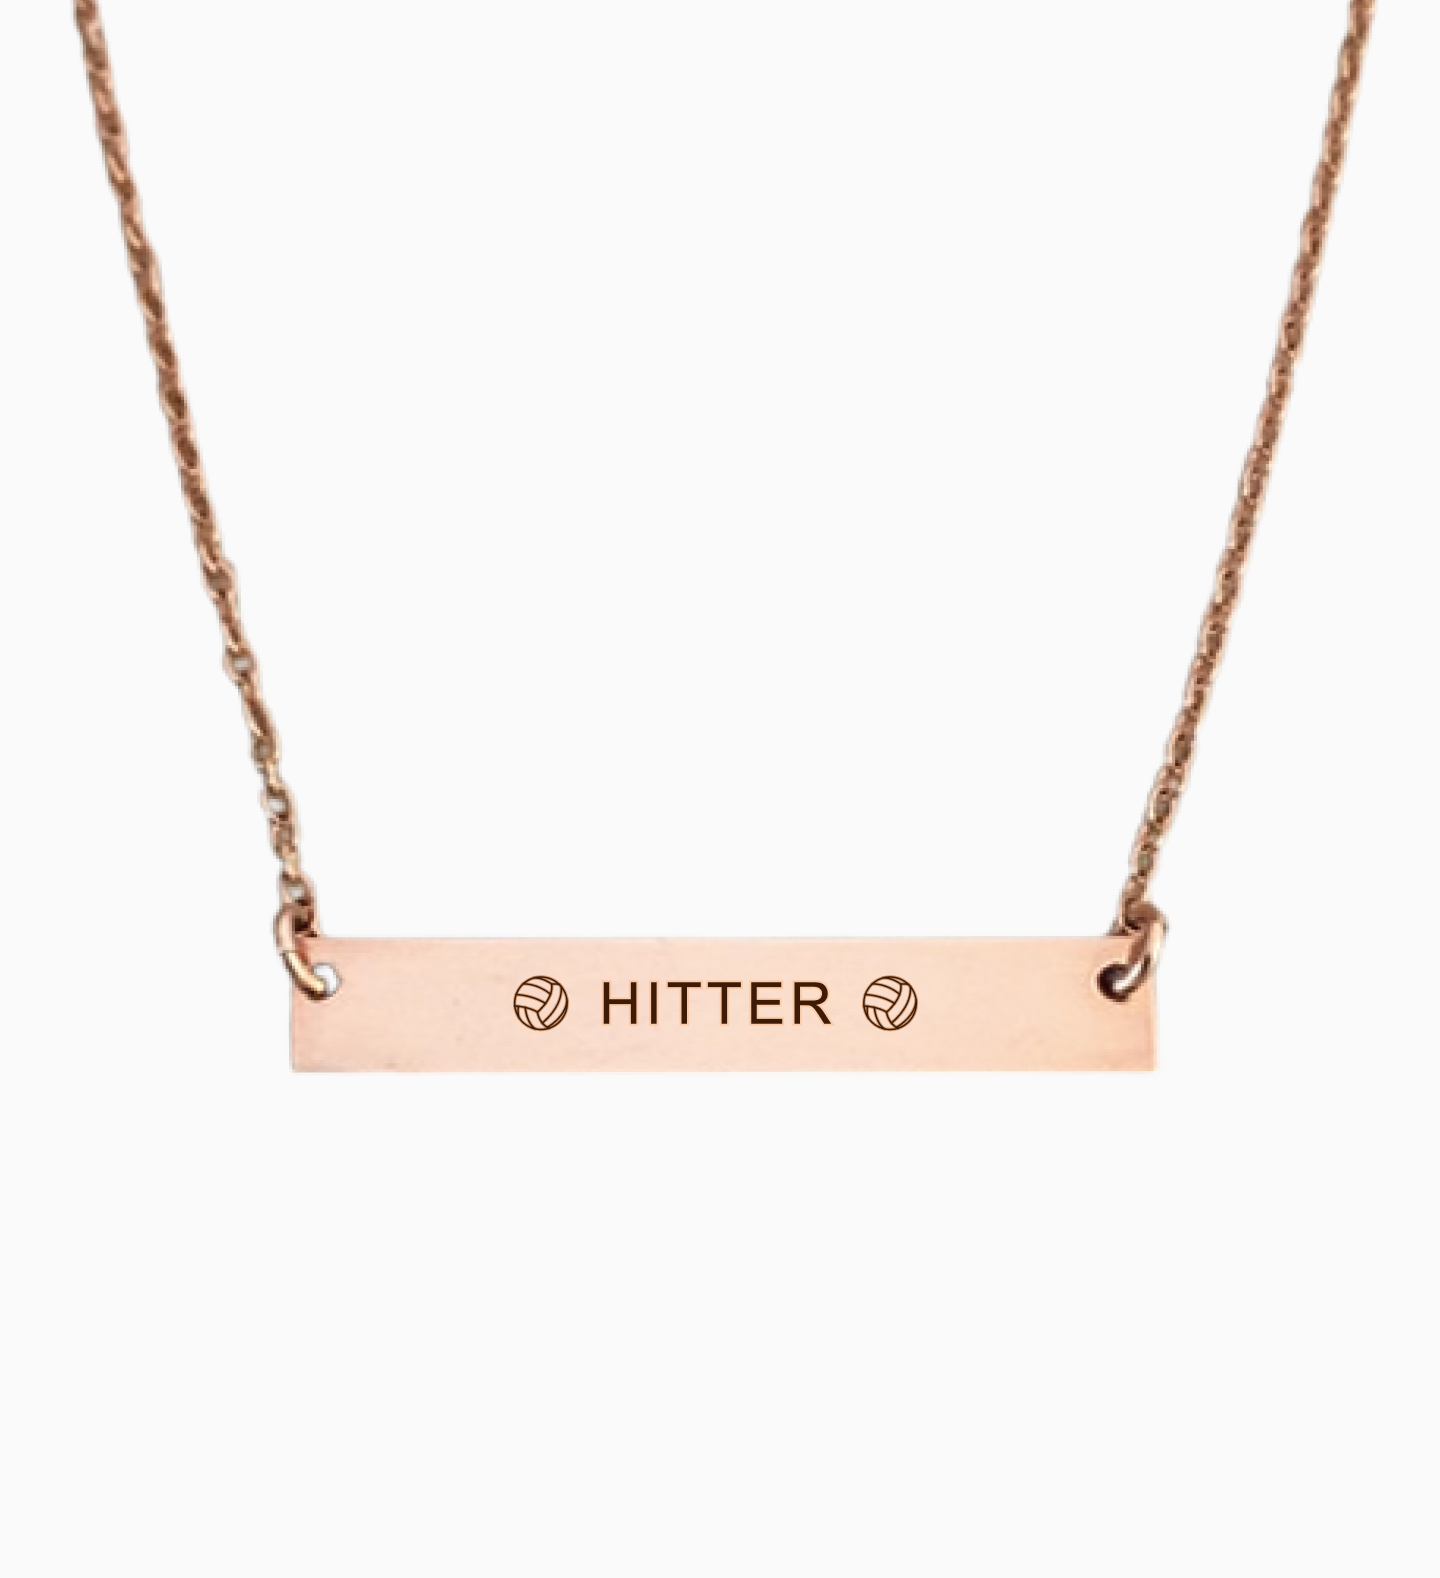 Hitter - Volleyball Position Engraved Necklace Bar